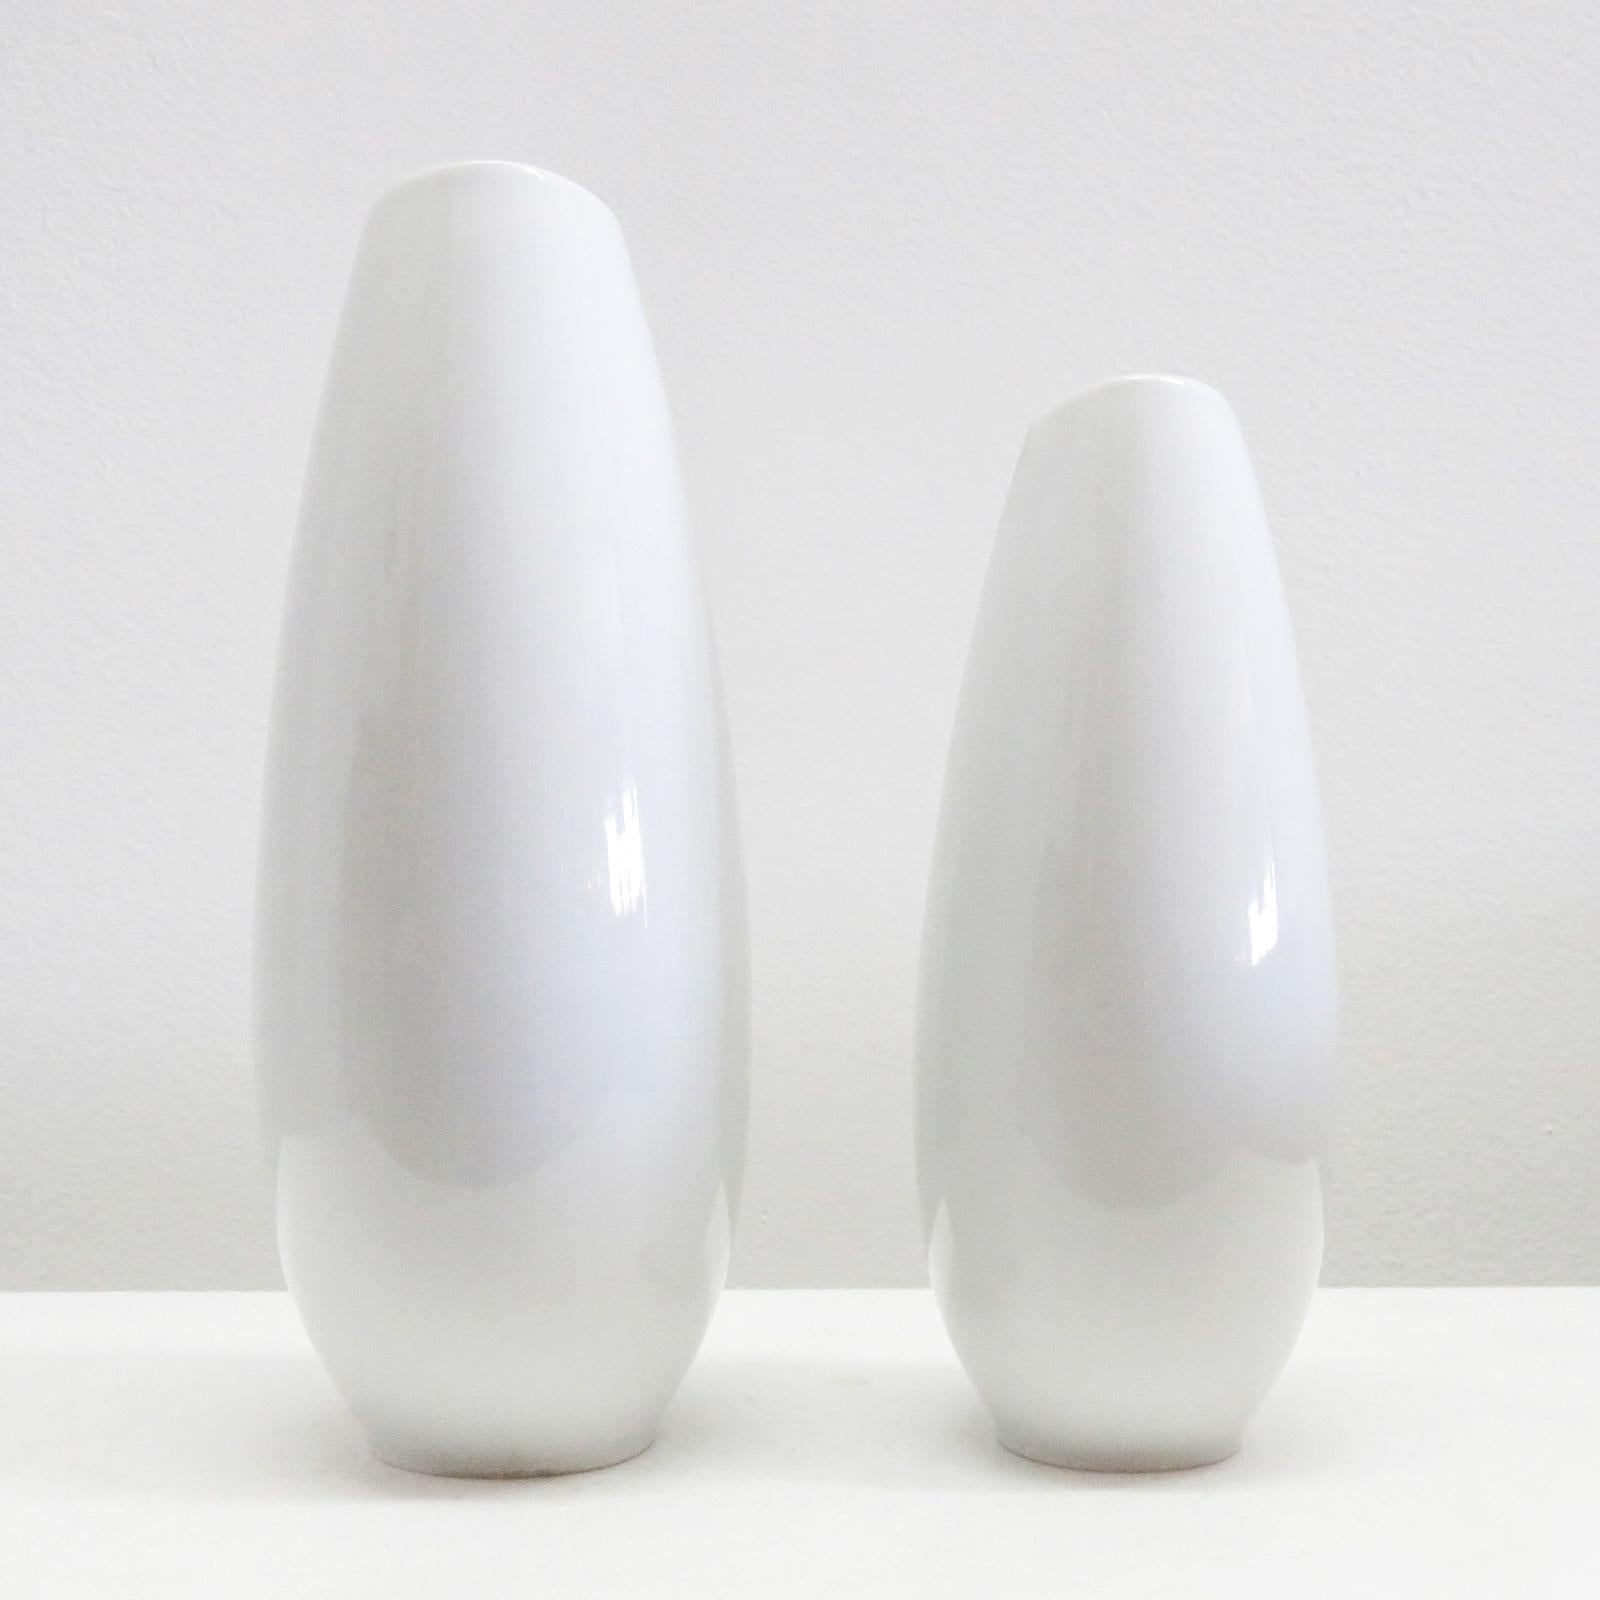 Porcelain Set of Raymond Loewy for Thomas Vases, 1970 For Sale